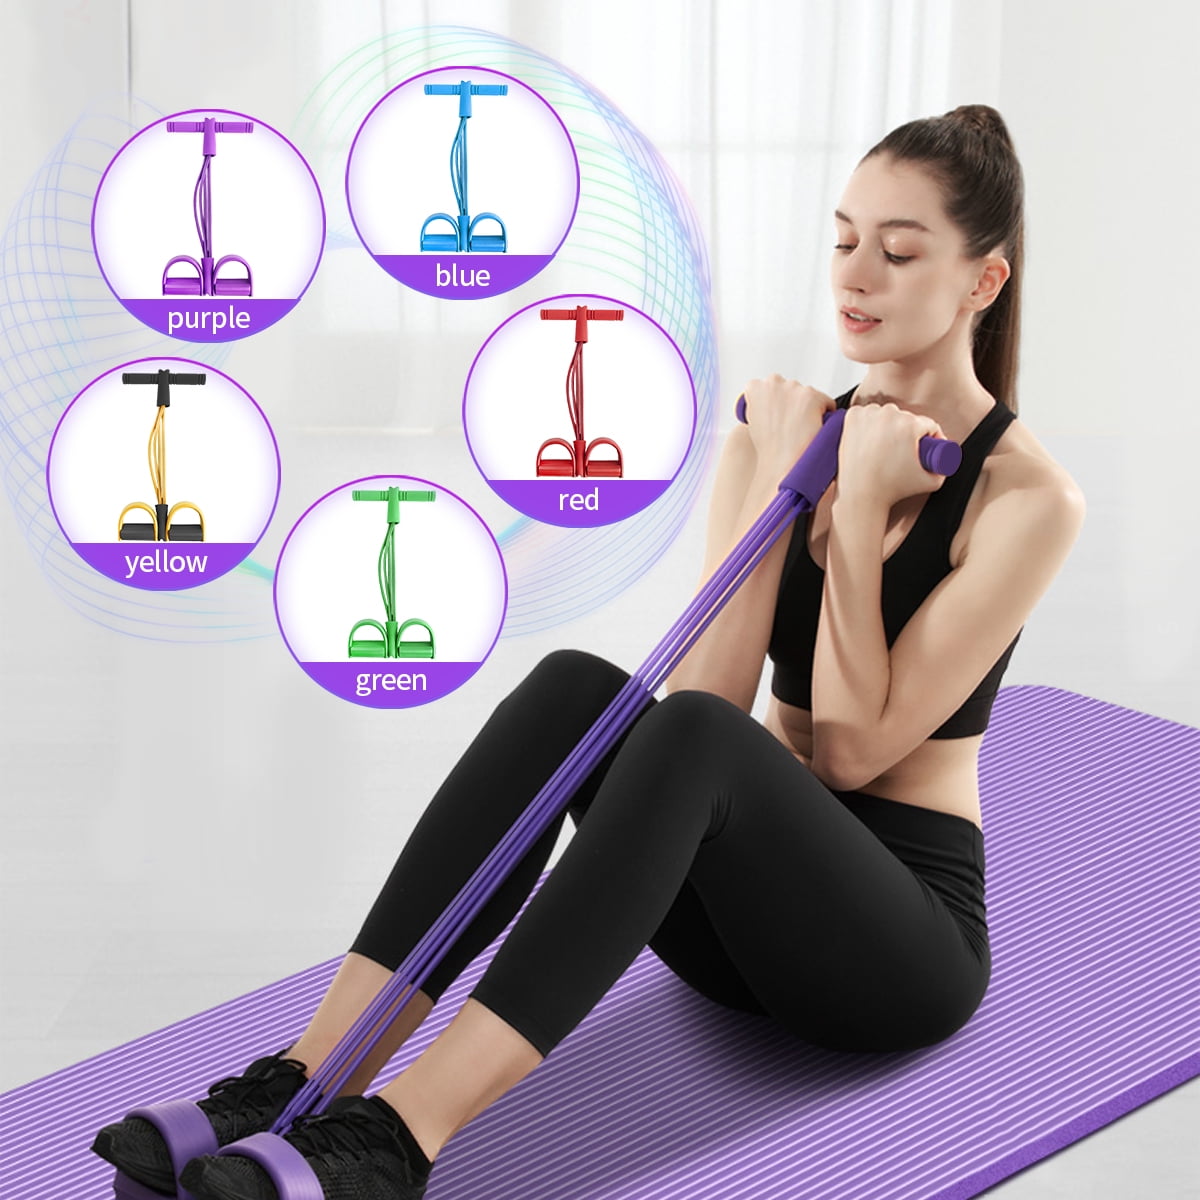 Details about   Resistance Bands Loop Set of 5 Exercise Workout CrossFit  Fitness Booty Band . 